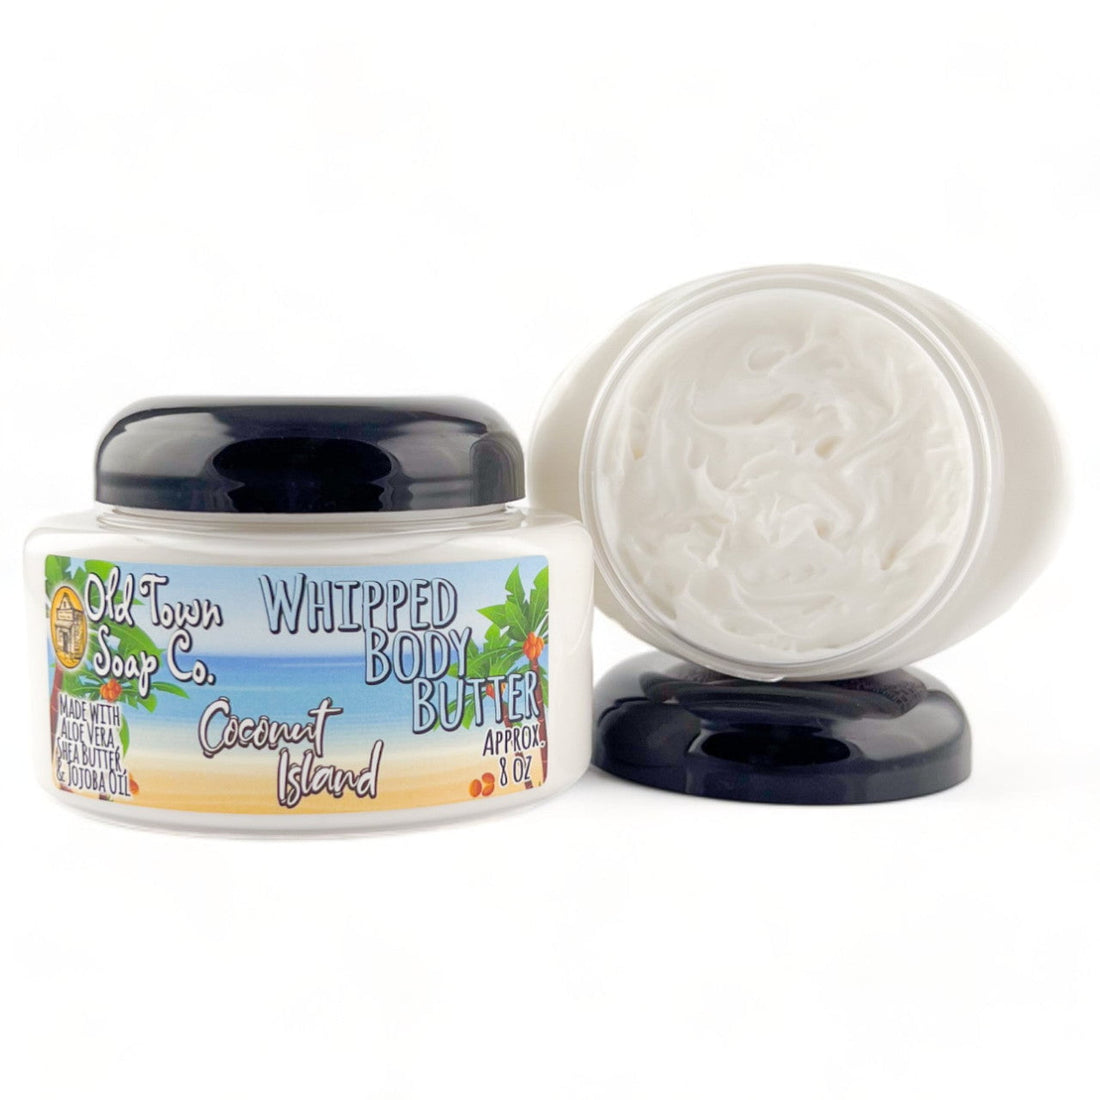 Coconut Island -Whipped Body Butter - Old Town Soap Co.